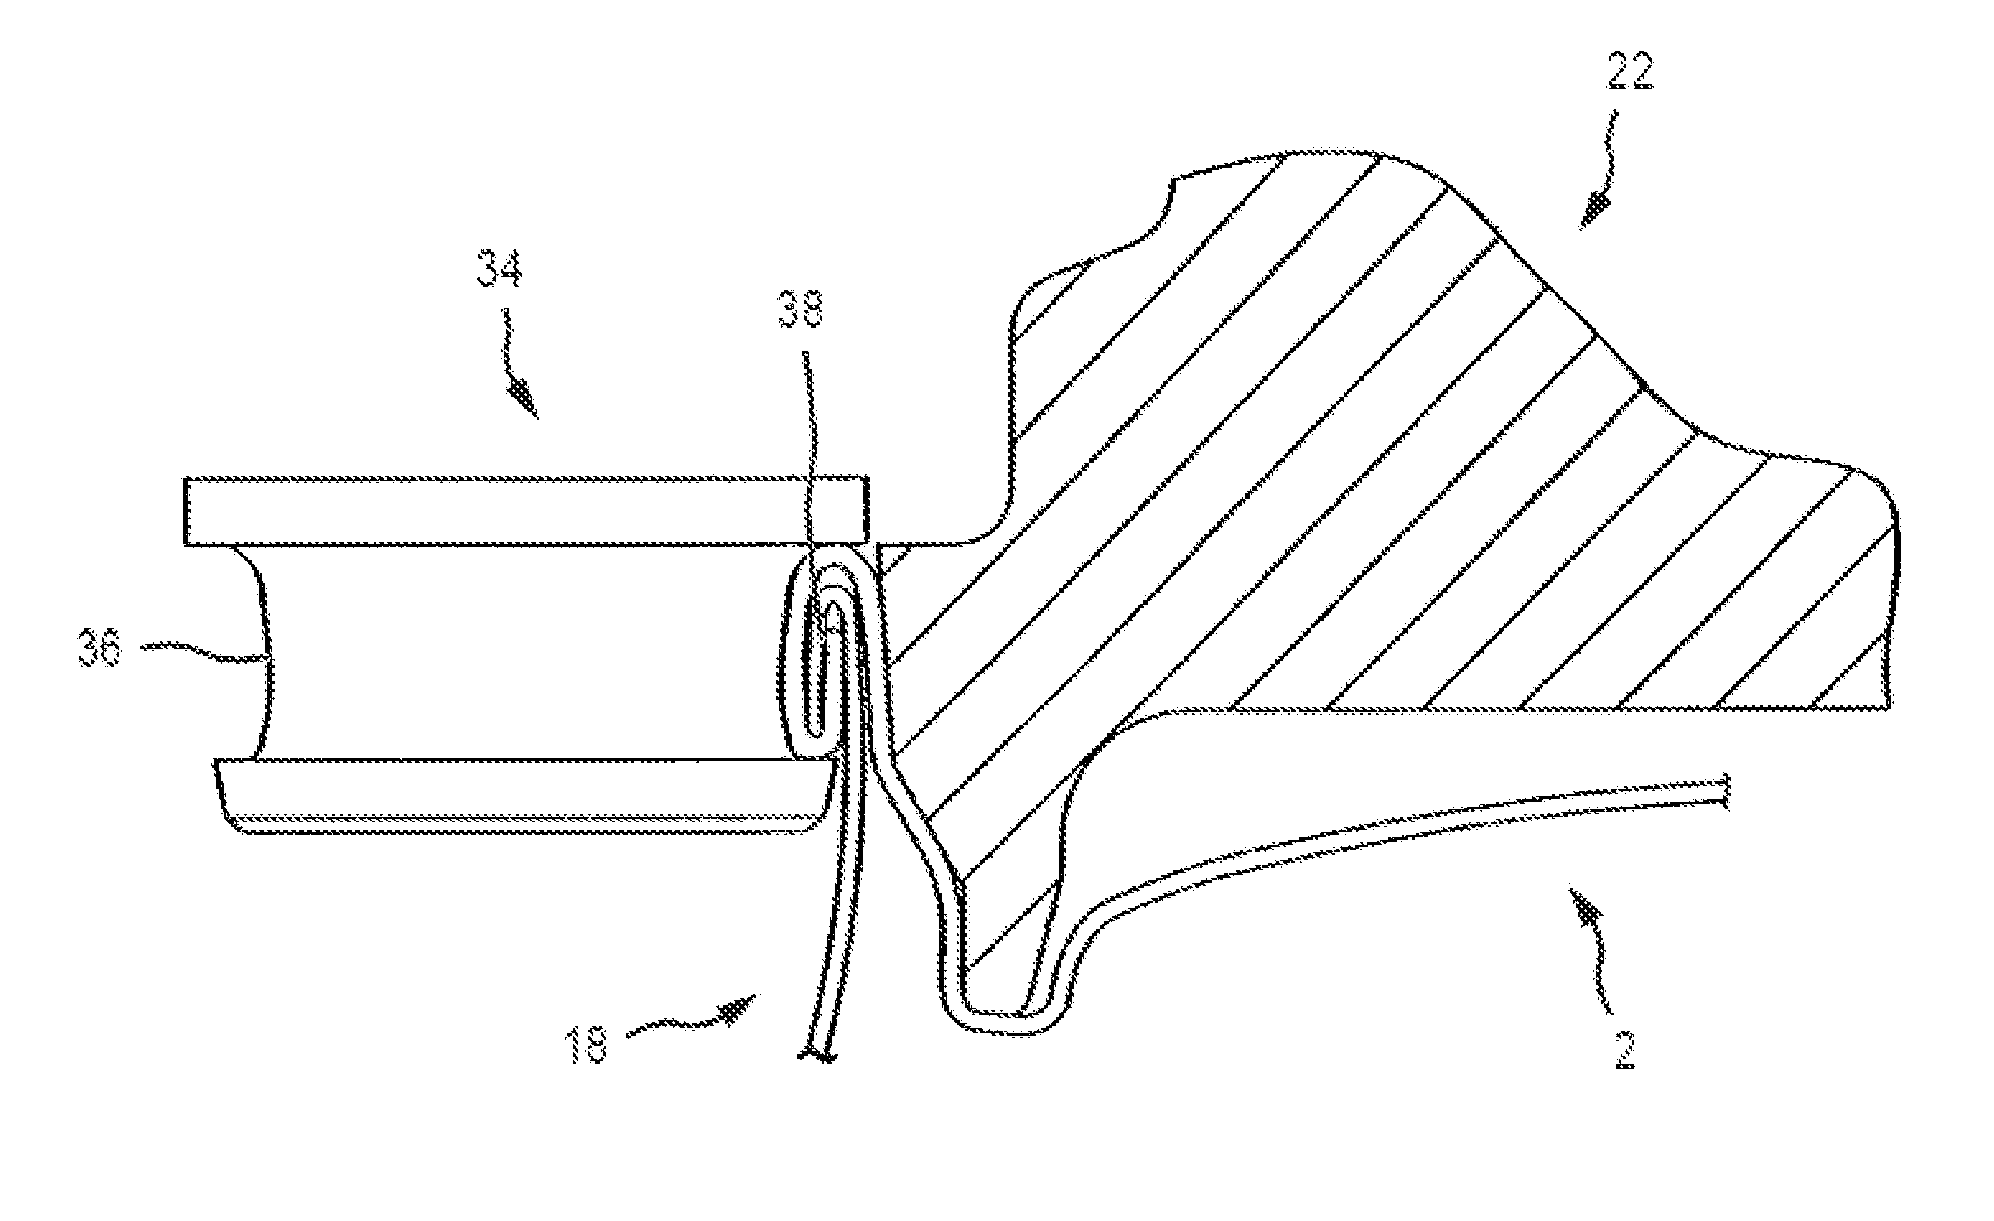 Method for filling, seaming, distributing and selling a beverage in a metallic container at a single location